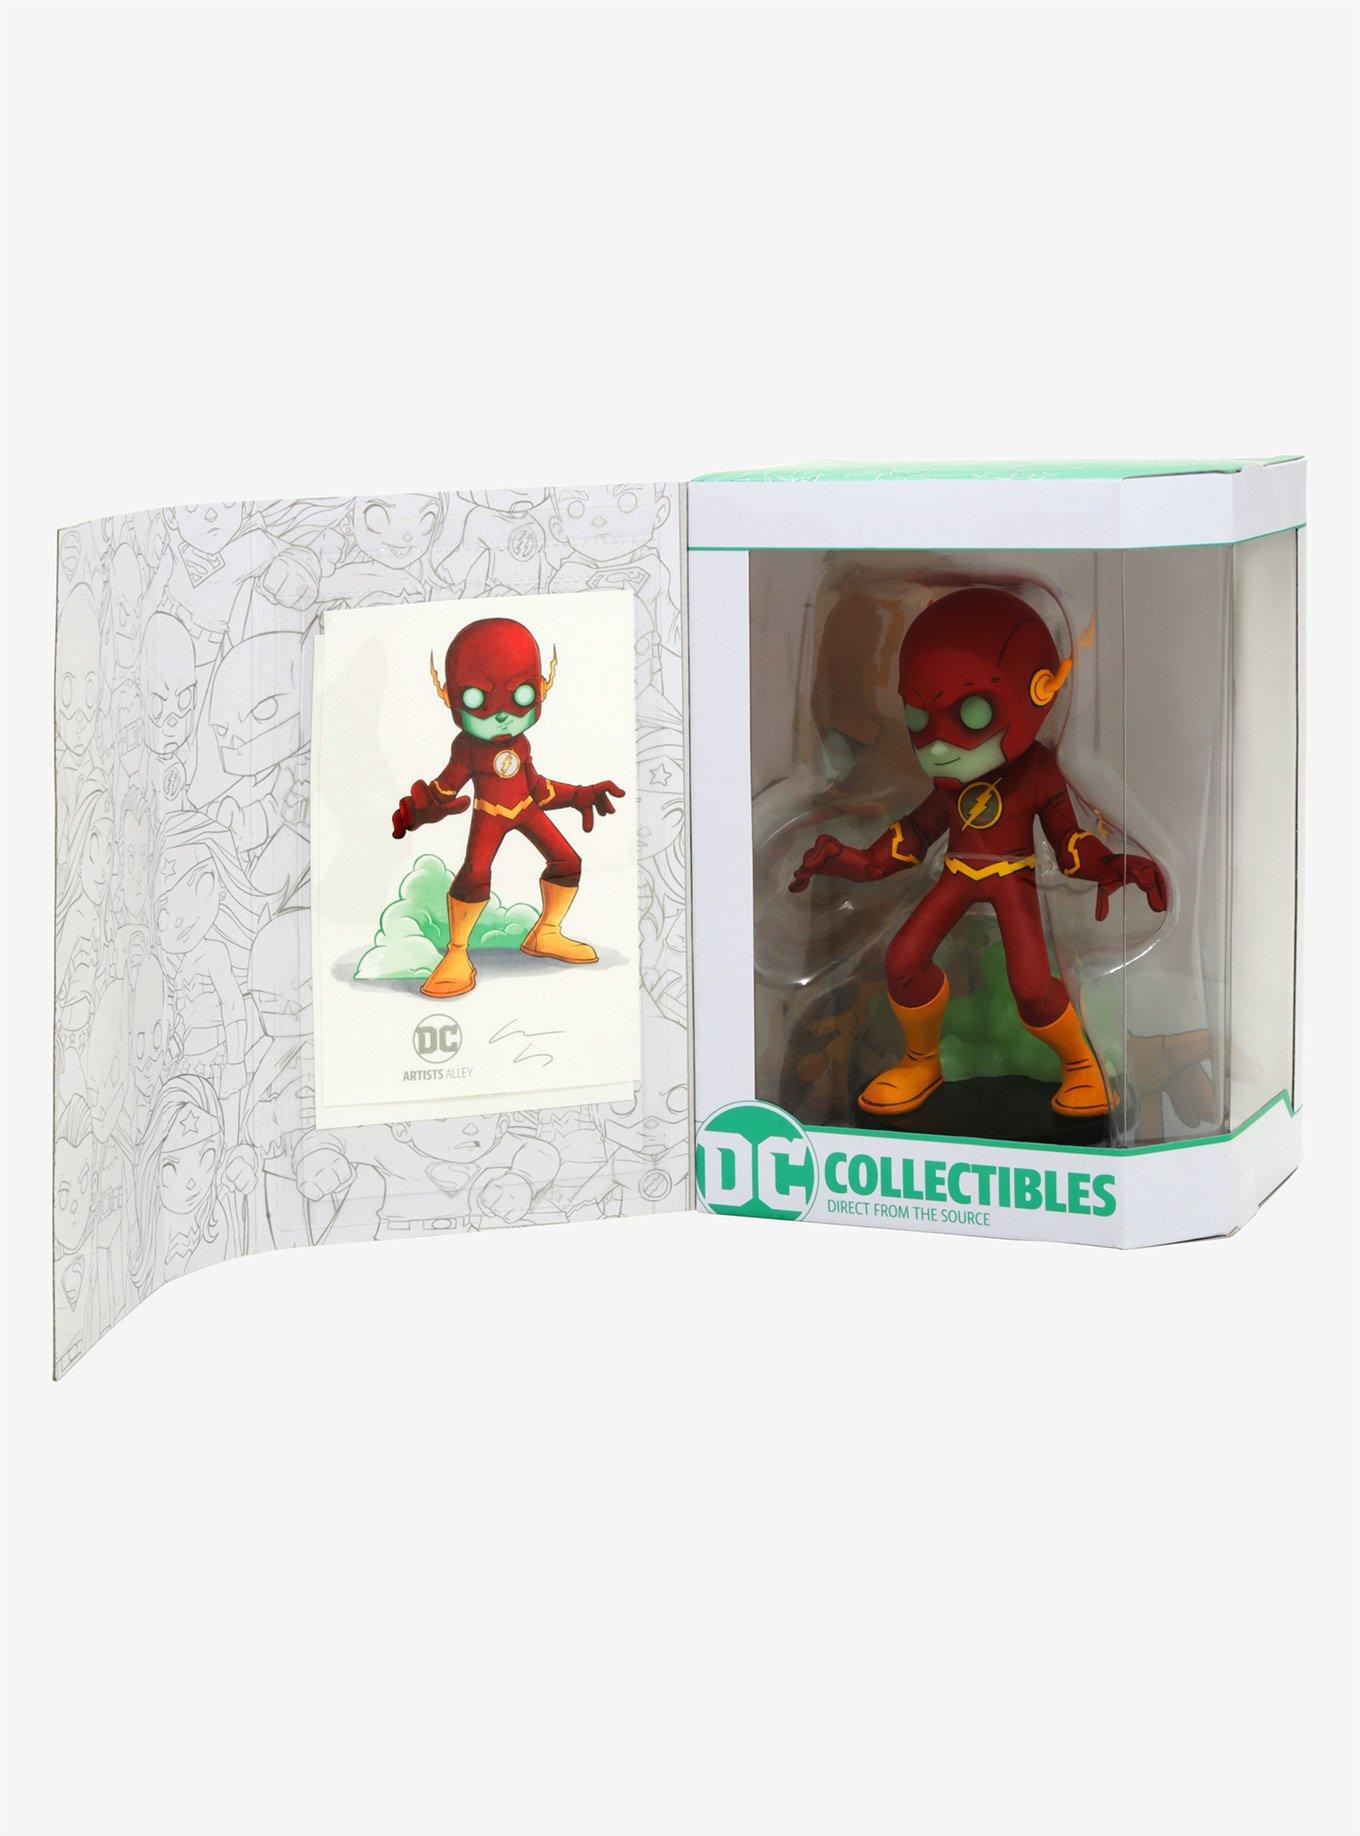 DC Comics Artists Alley The Flash Glow Vinyl Figure By Chris Uminga - BoxLunch Exclusive, , alternate